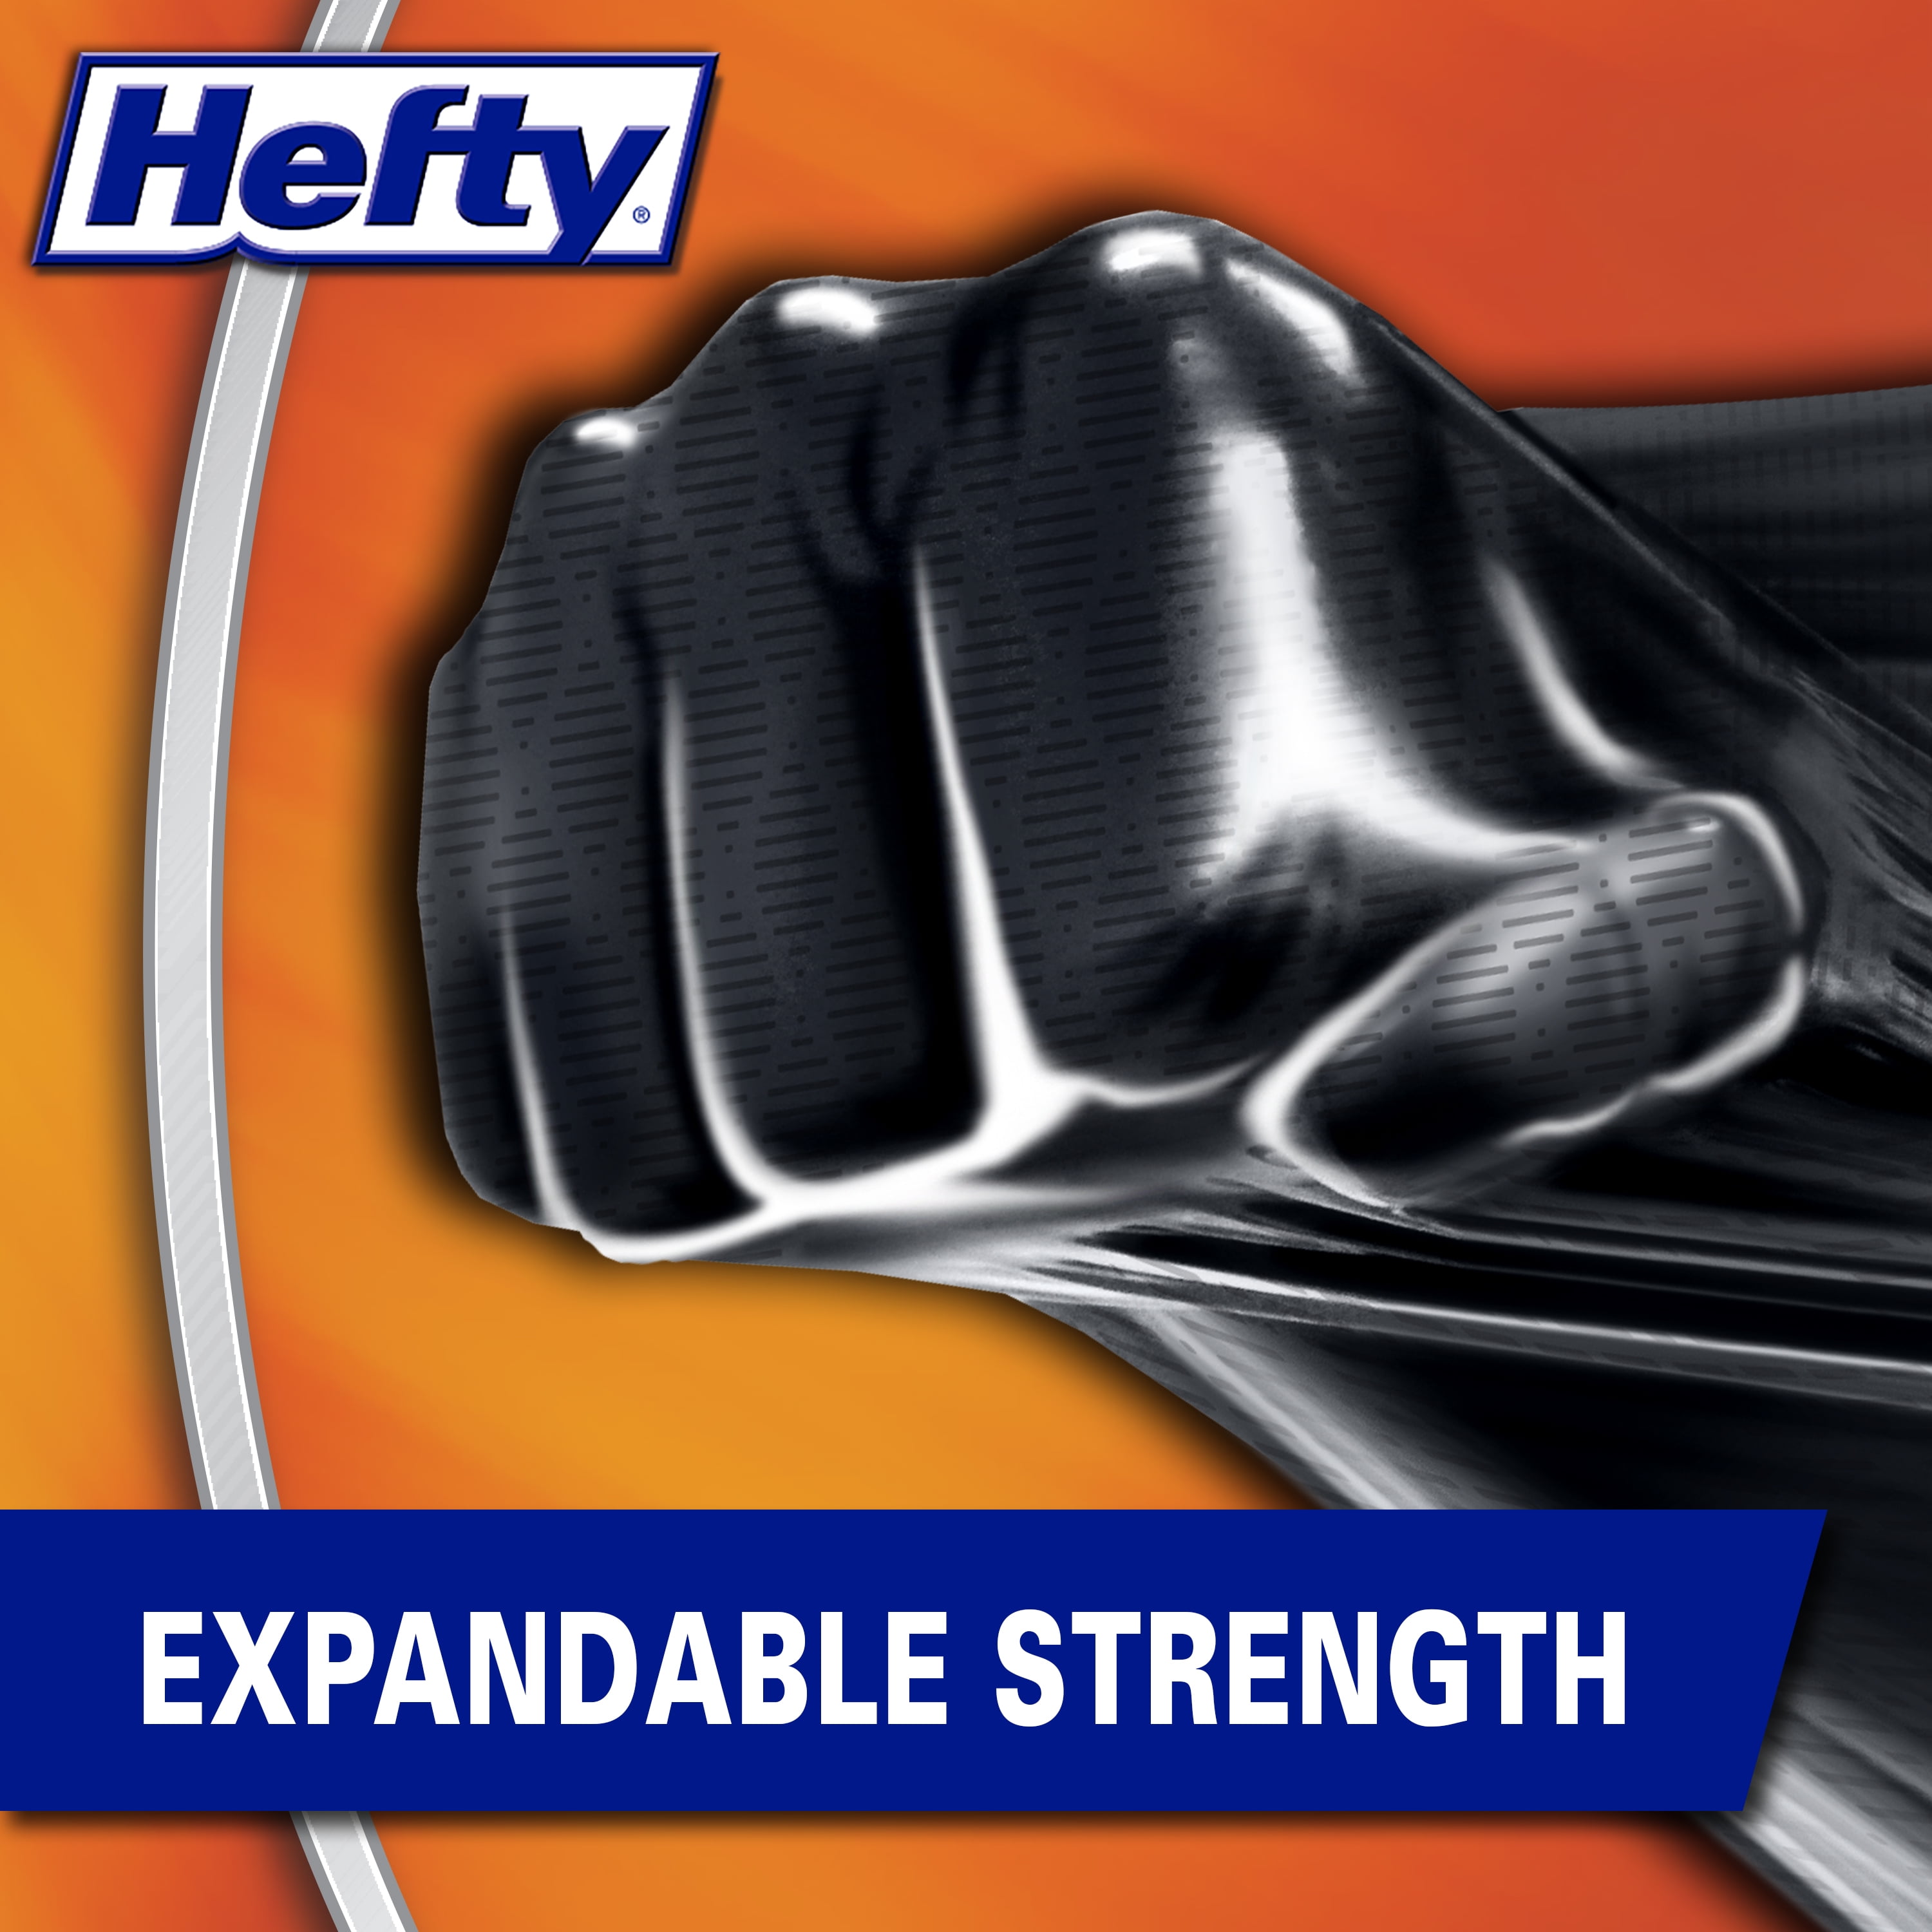 Hefty Ultra Strong Multipurpose Large Trash Bags, Black, Unscented Scent,  30 Gallon, 25 Count (Pack of 6), 150 Total